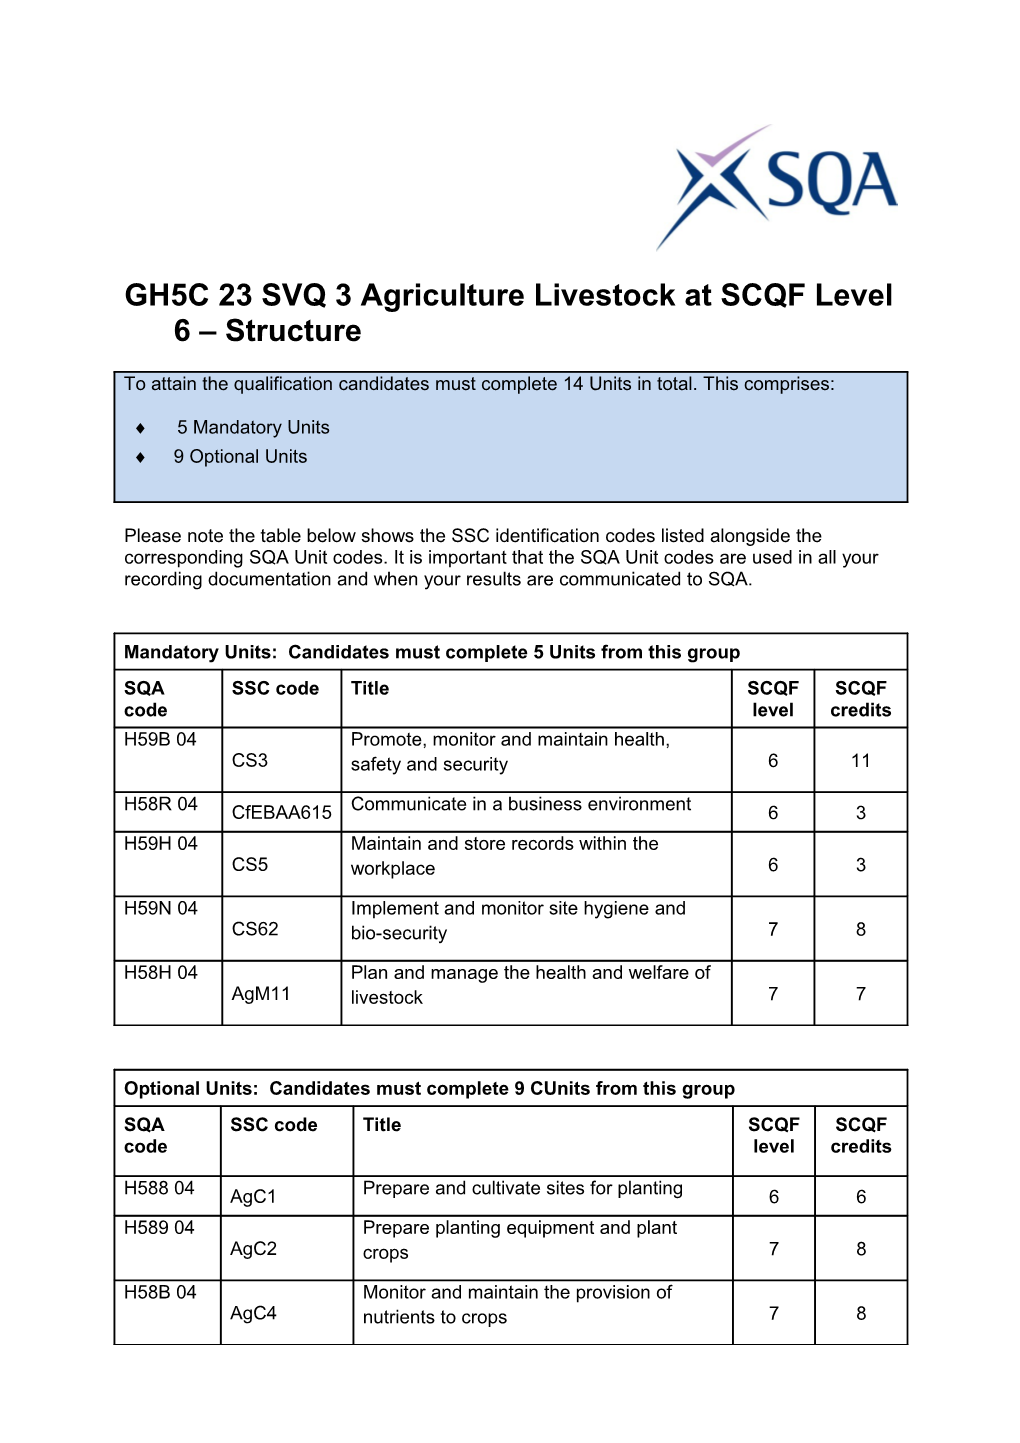 GH5C 23 SVQ 3 Agriculture Livestock at SCQF Level 6 Structure